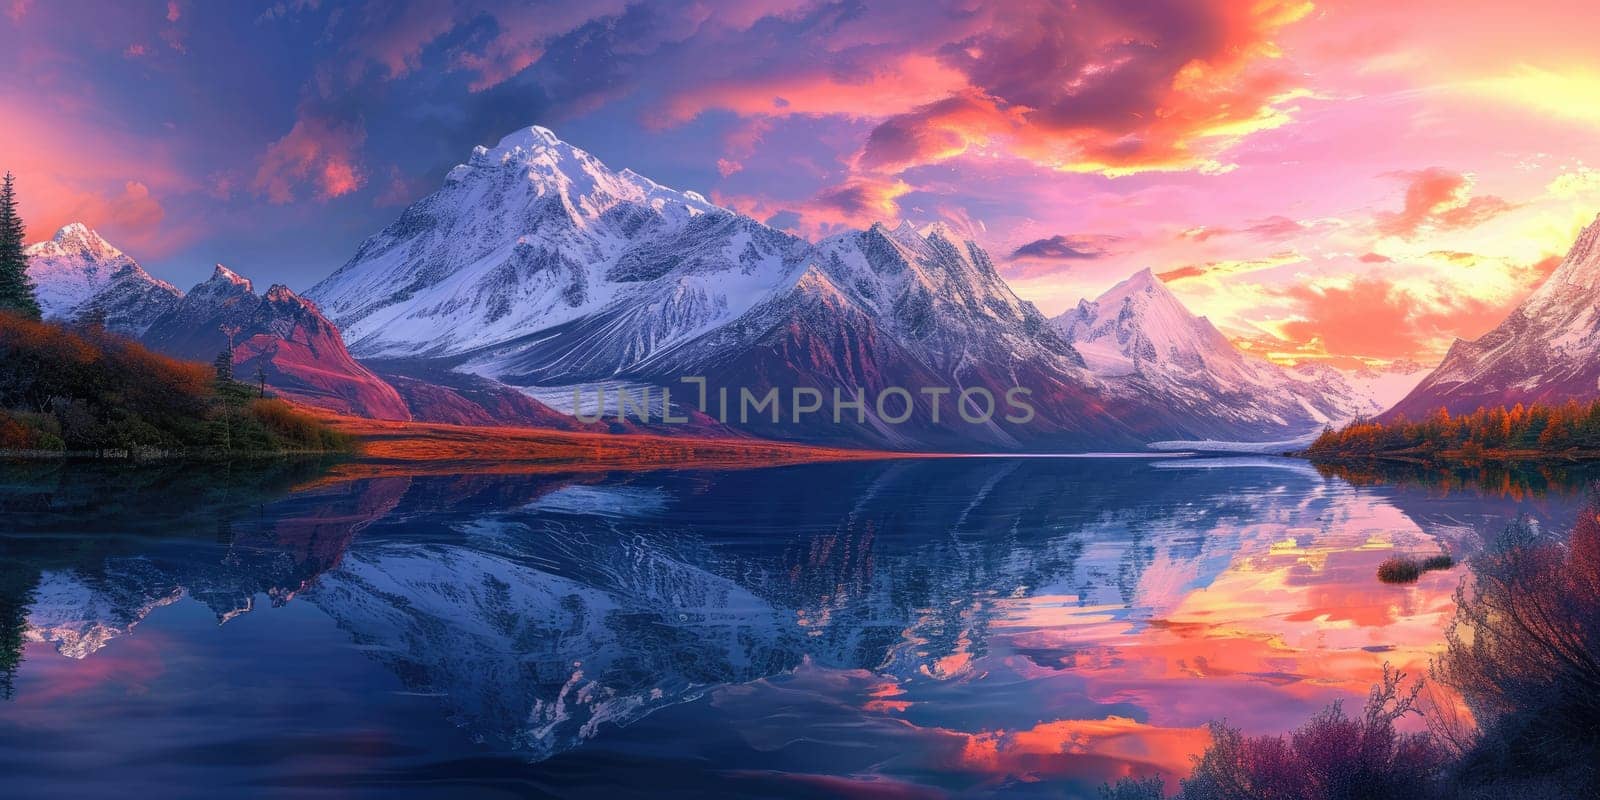 A majestic mountain landscape at sunset, snow-capped peaks. Resplendent. by biancoblue